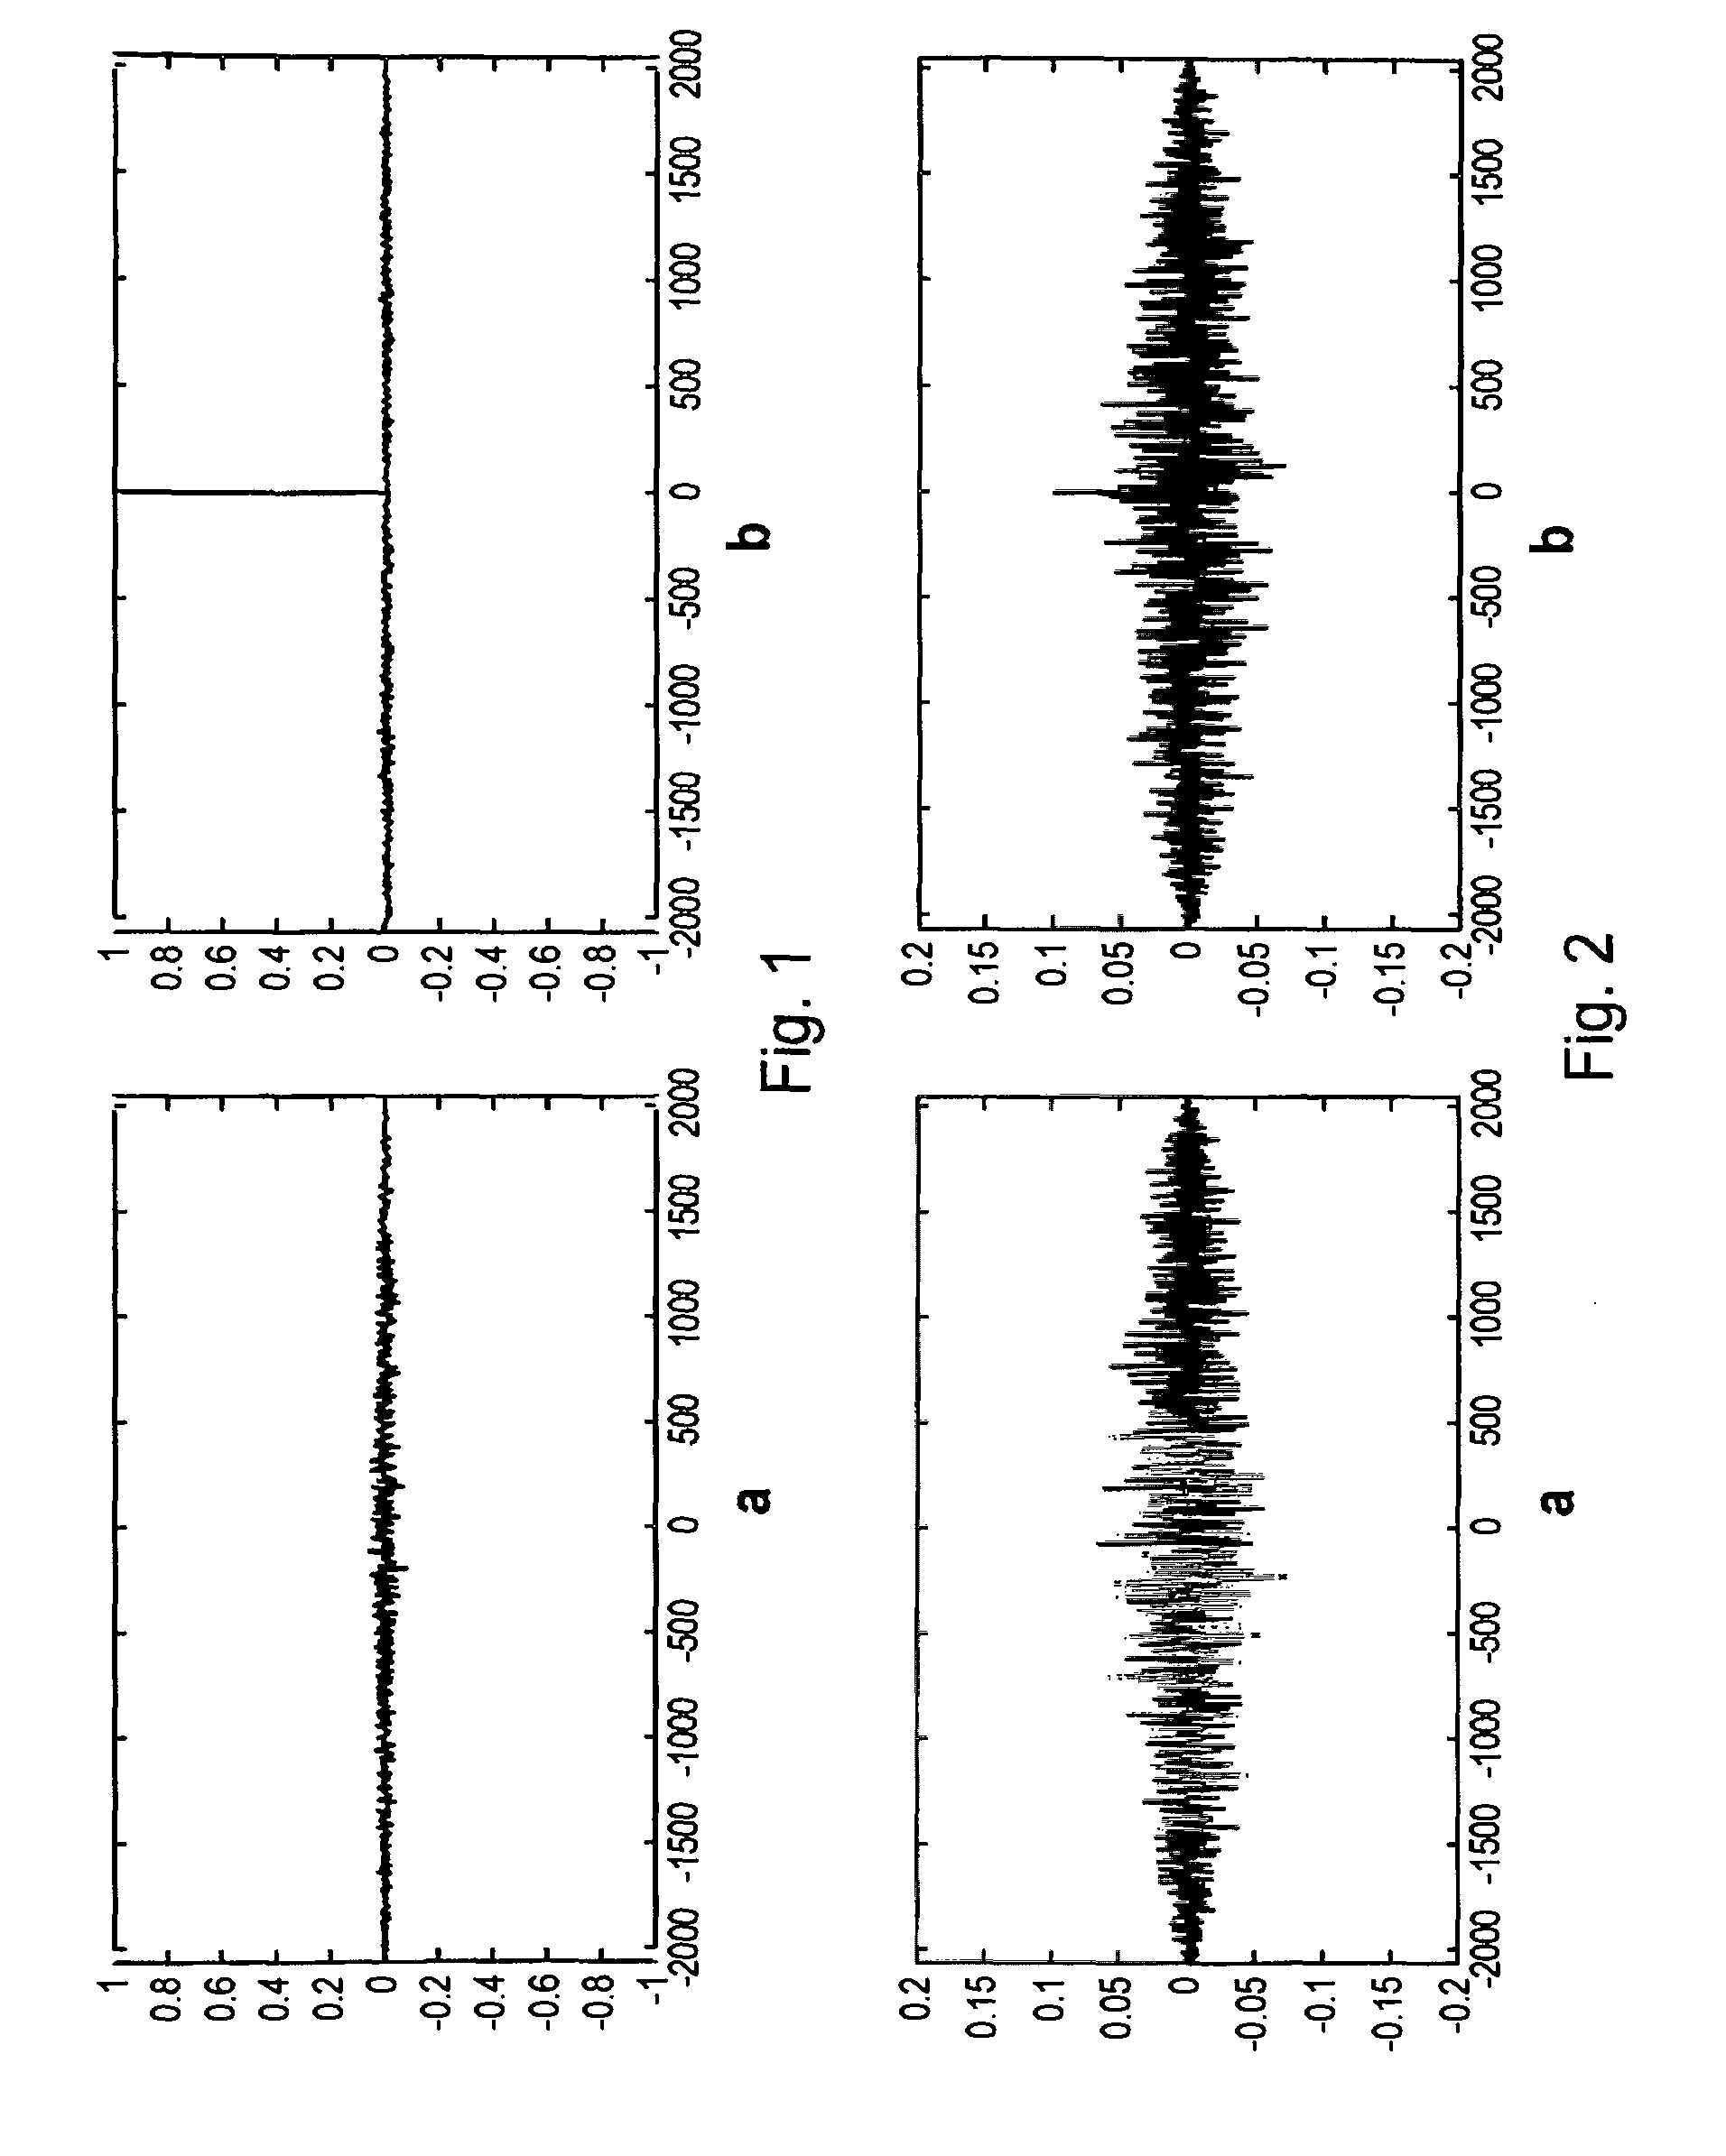 Method and apparatus for regaining watermark data that were embedded in an original signal by modifying sections of said original signal in relation to at least two different reference data sequences